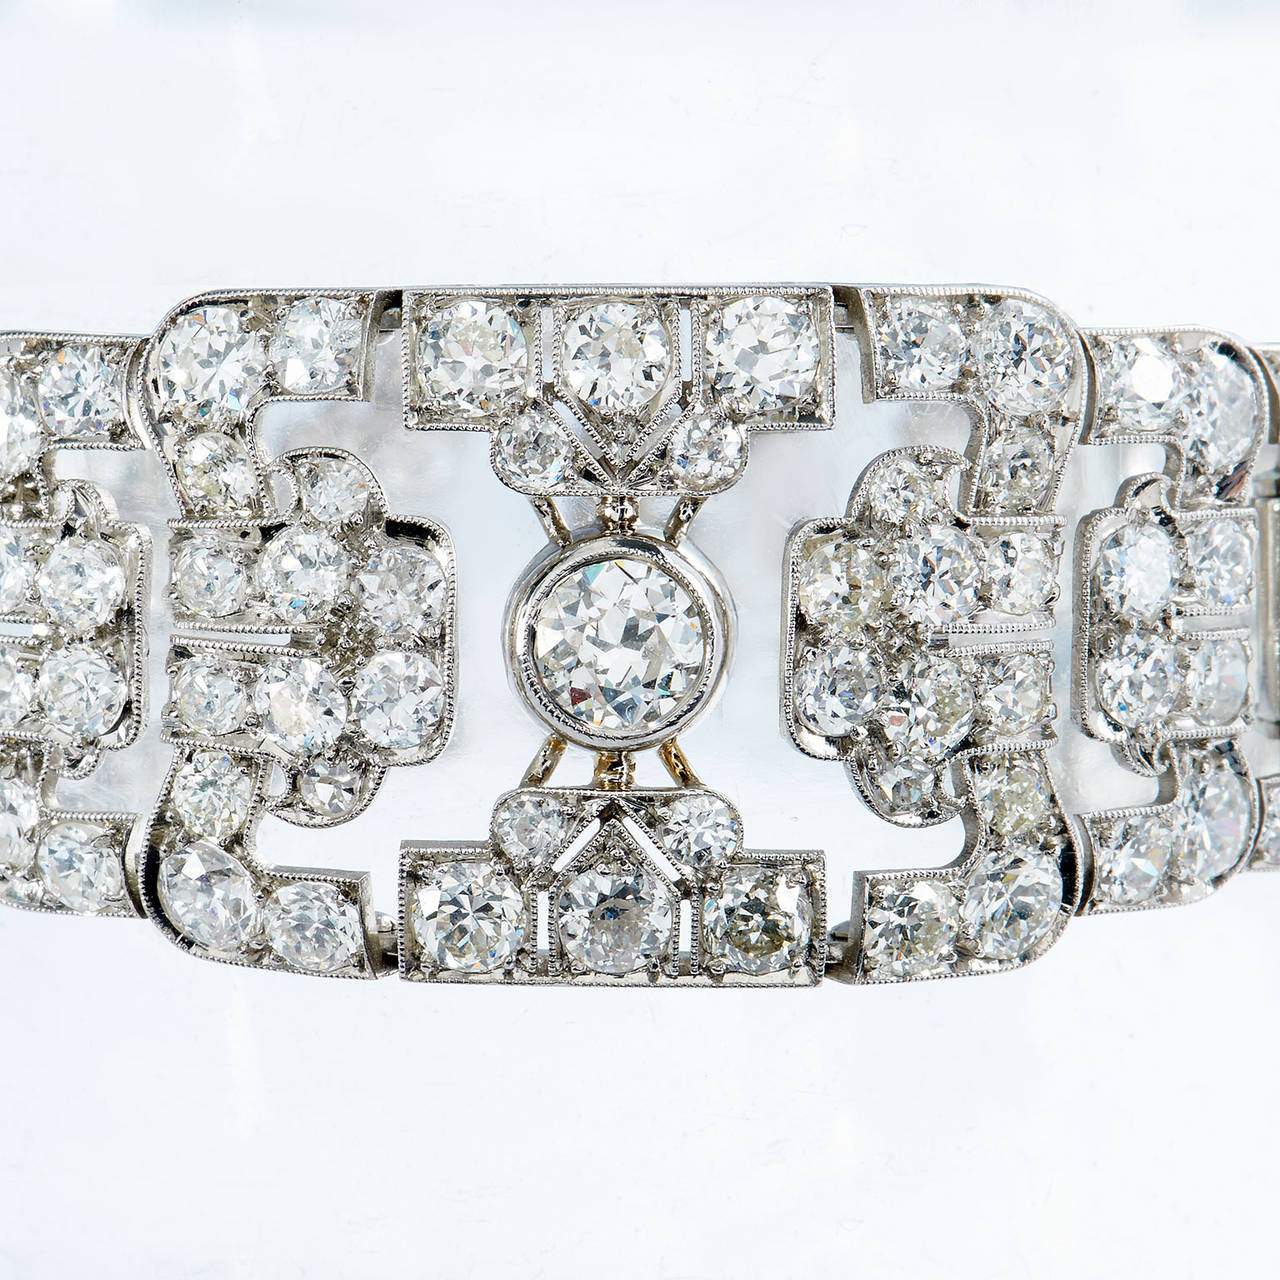 This Art Deco three panel platinum bracelet consists of 220 old European cut diamonds with an impressive estimated total carat weight of 19.24. Prominently displayed in the center, sits a magnificent old European cut diamond that weighs 1.64 carats